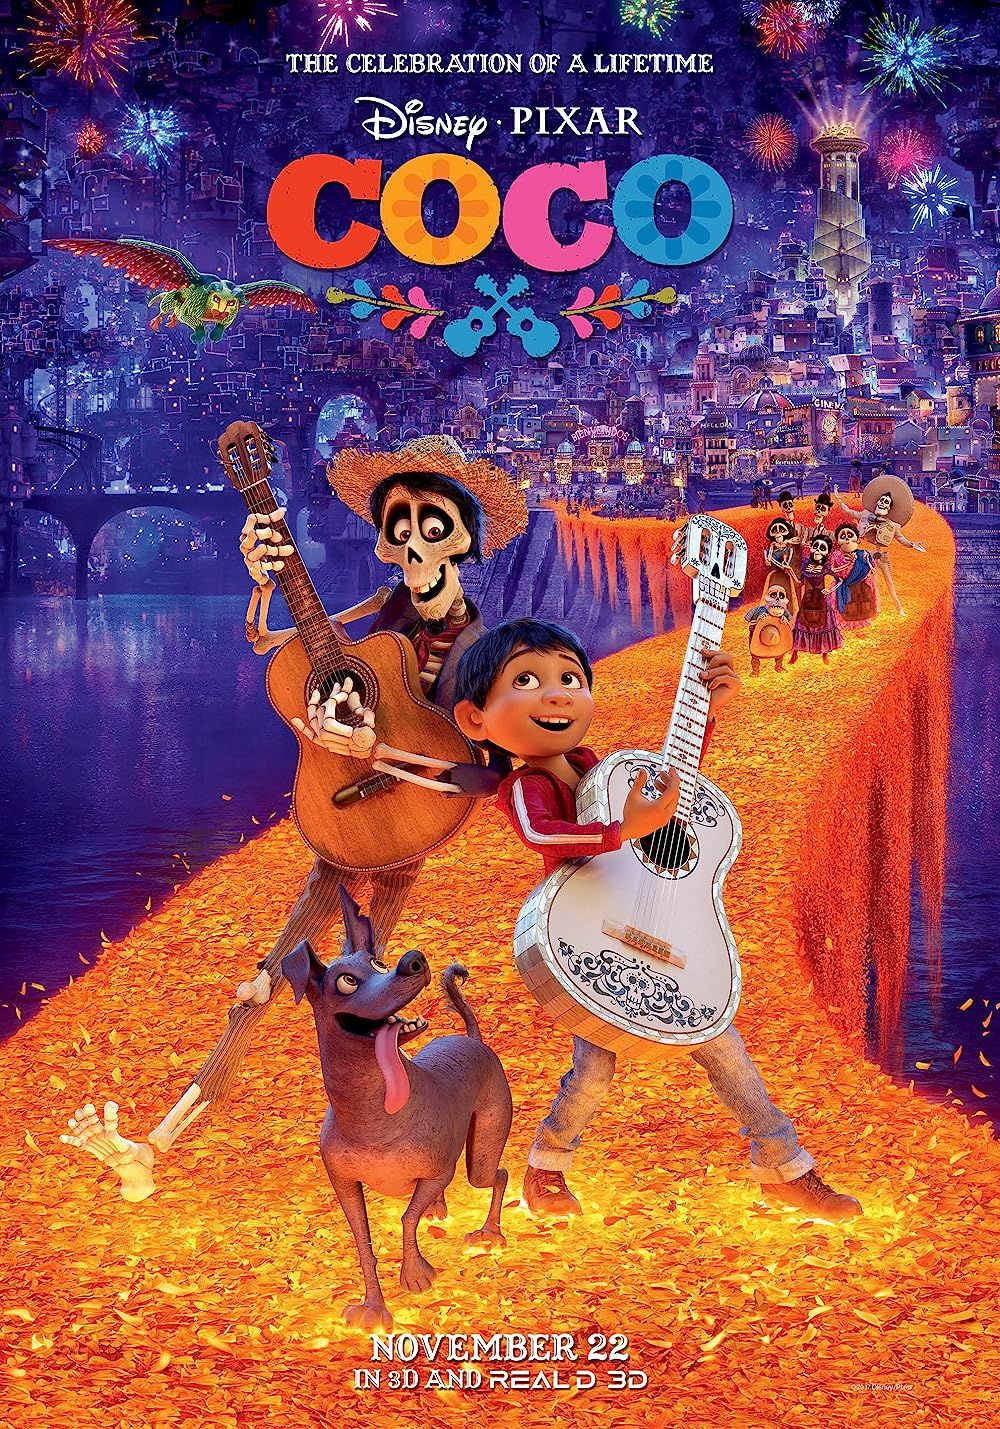 The cast of Pixar's Coco poses on the bridge in the official movie poster.